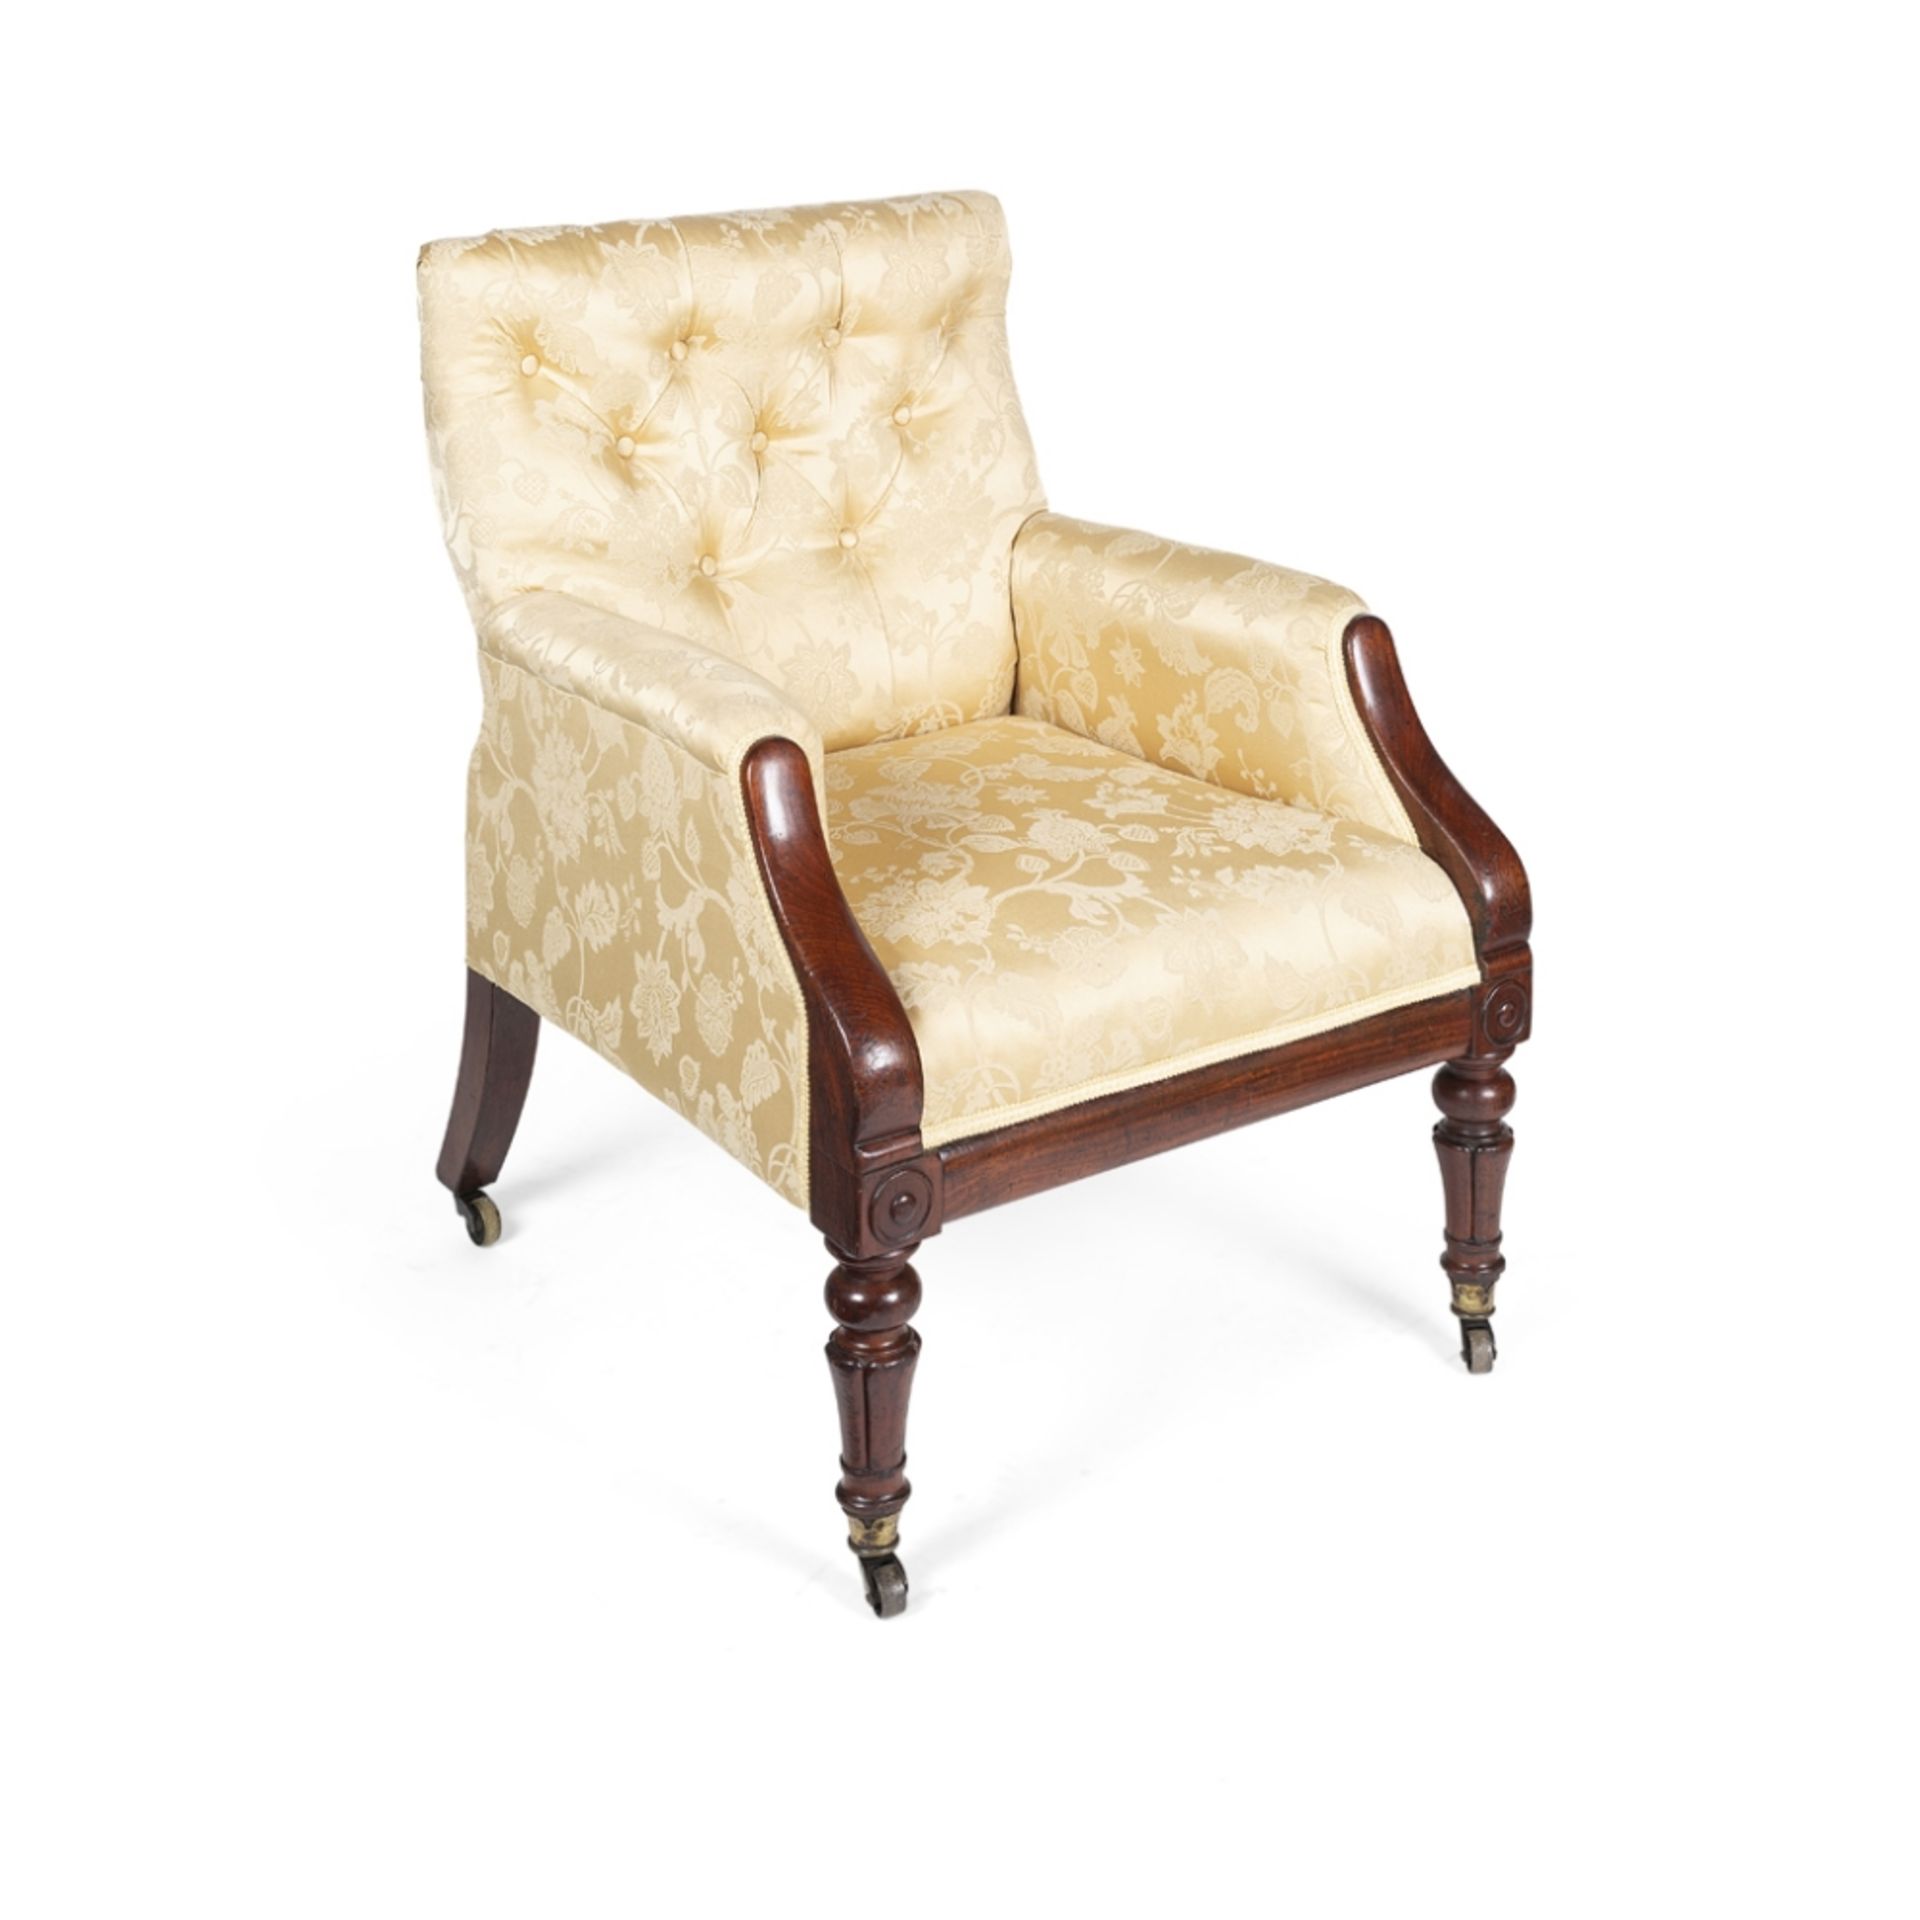 WILLIAM IV MAHOGANY LIBRARY ARMCHAIR19TH CENTURY the low square button upholstered back above a